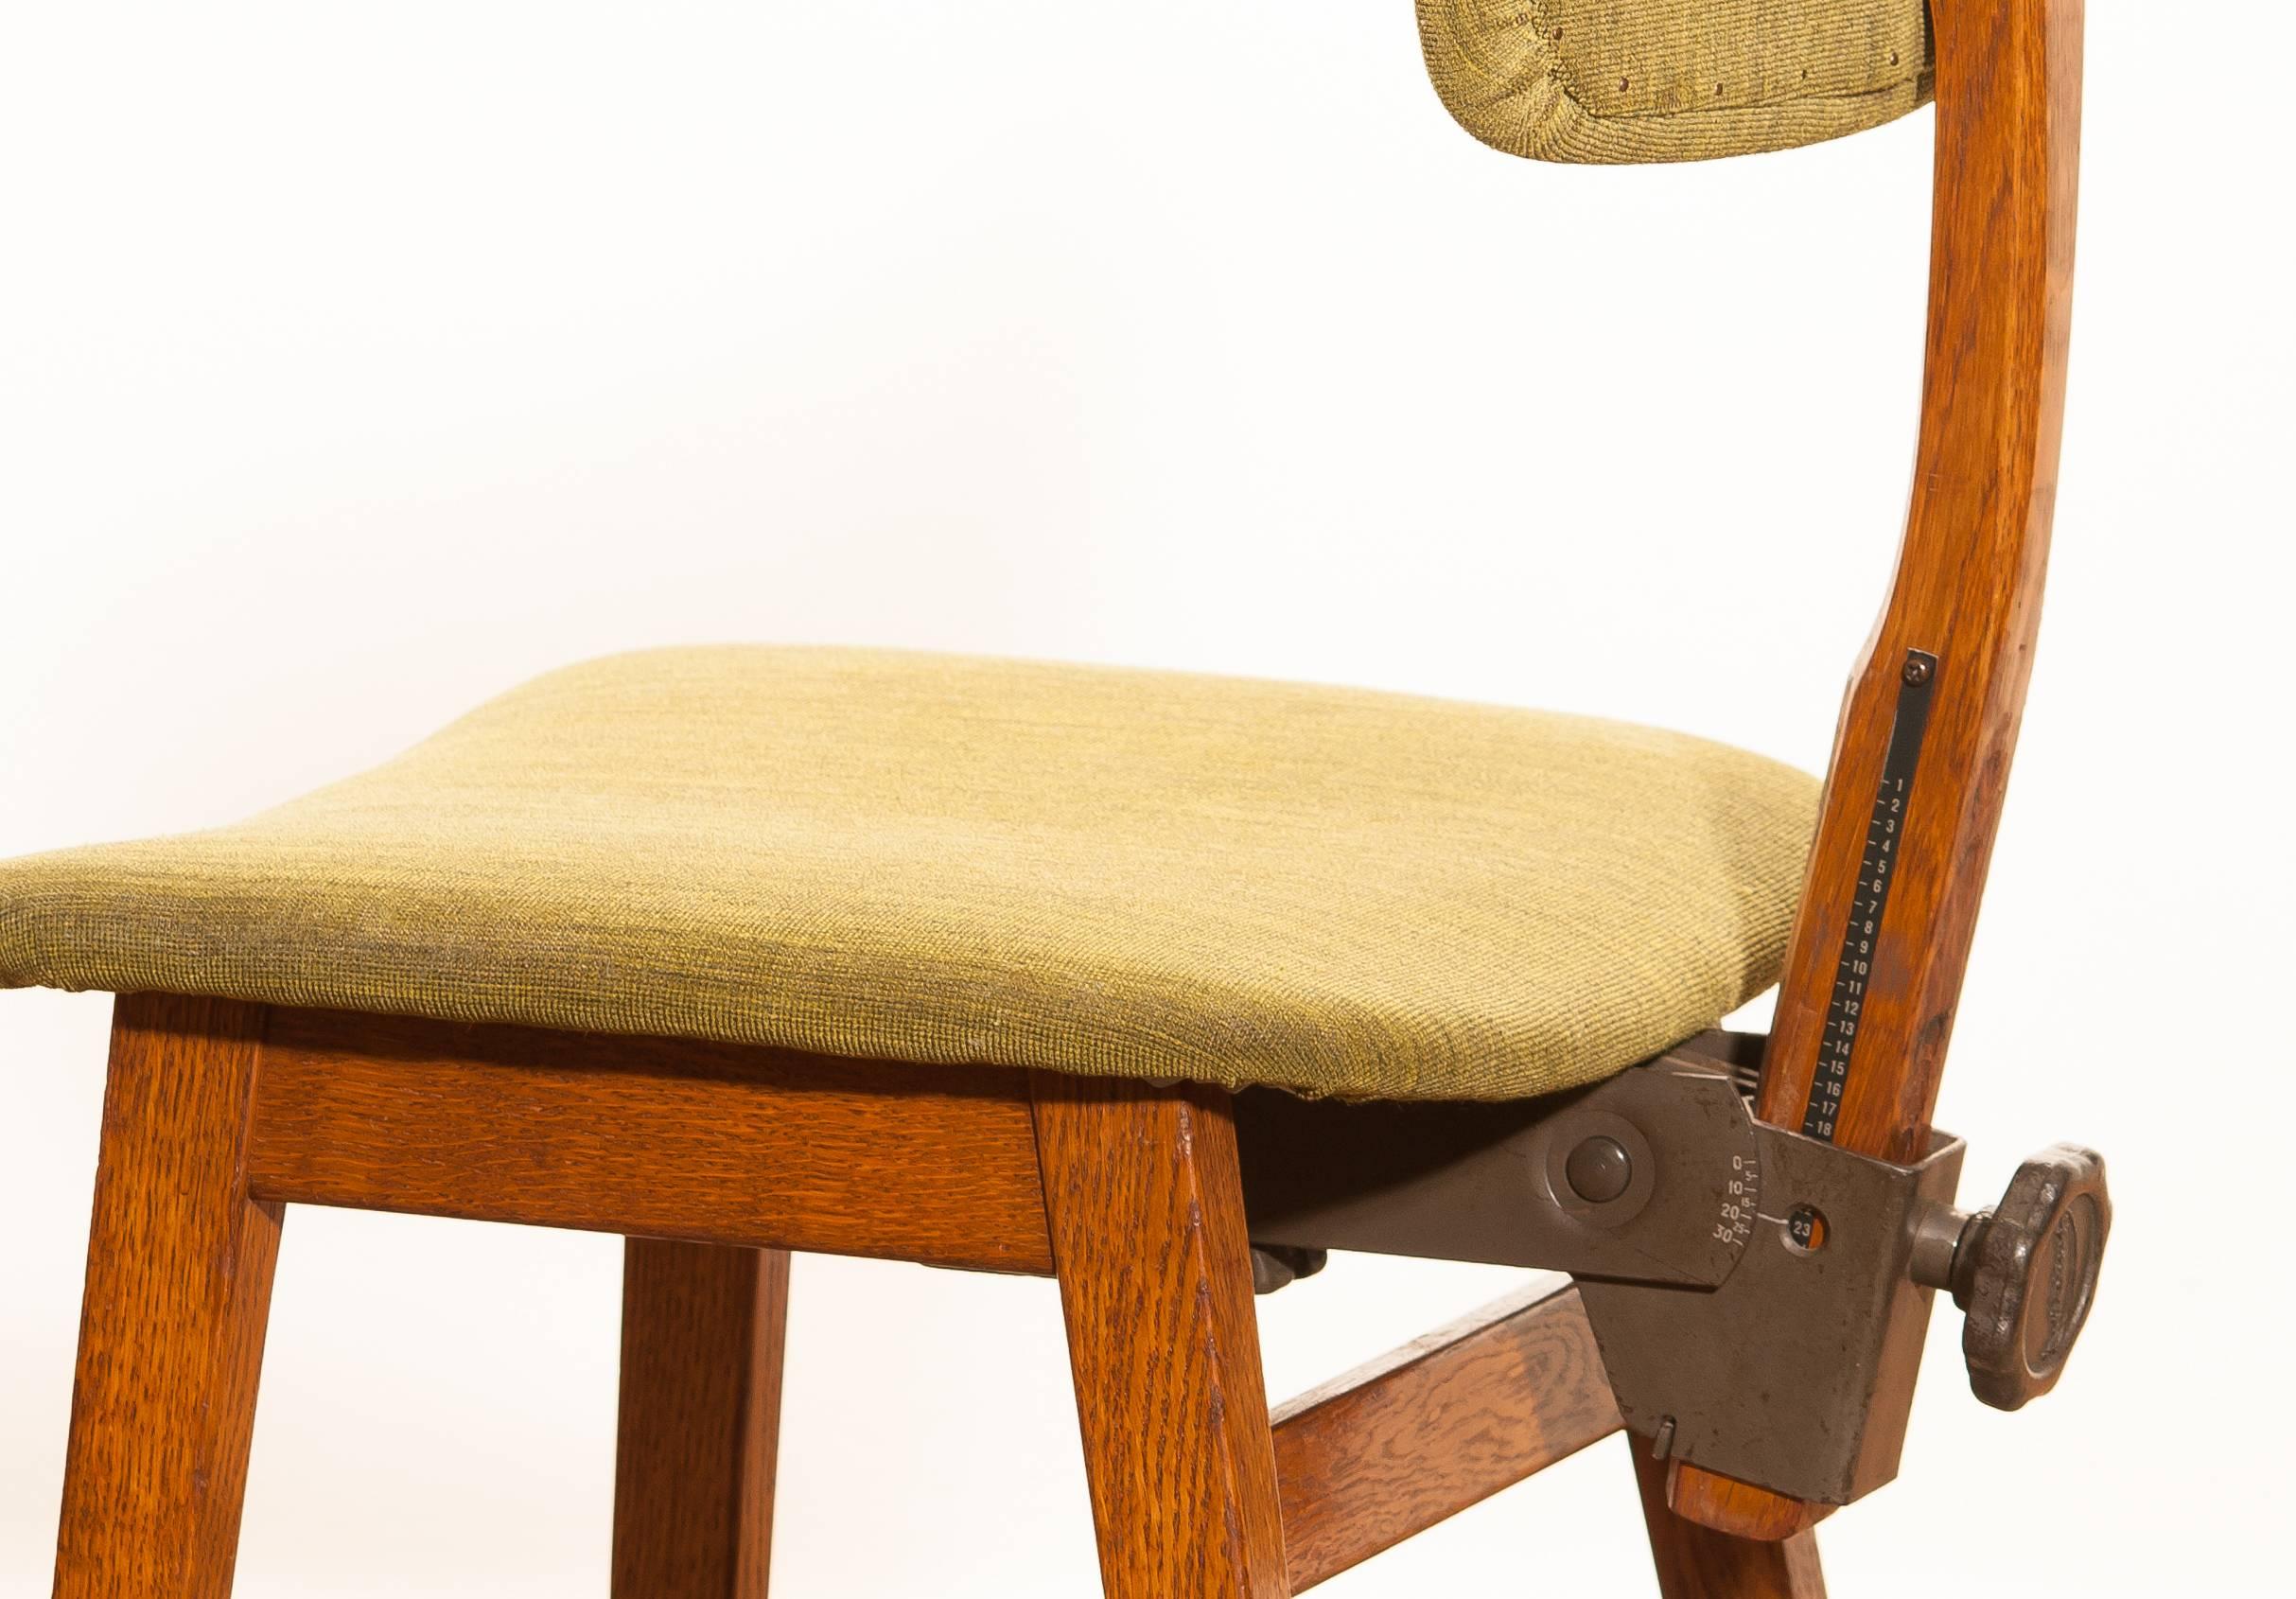 1960s, Teak and Wool Desk Chair by Âtvidabergs Sweden 4